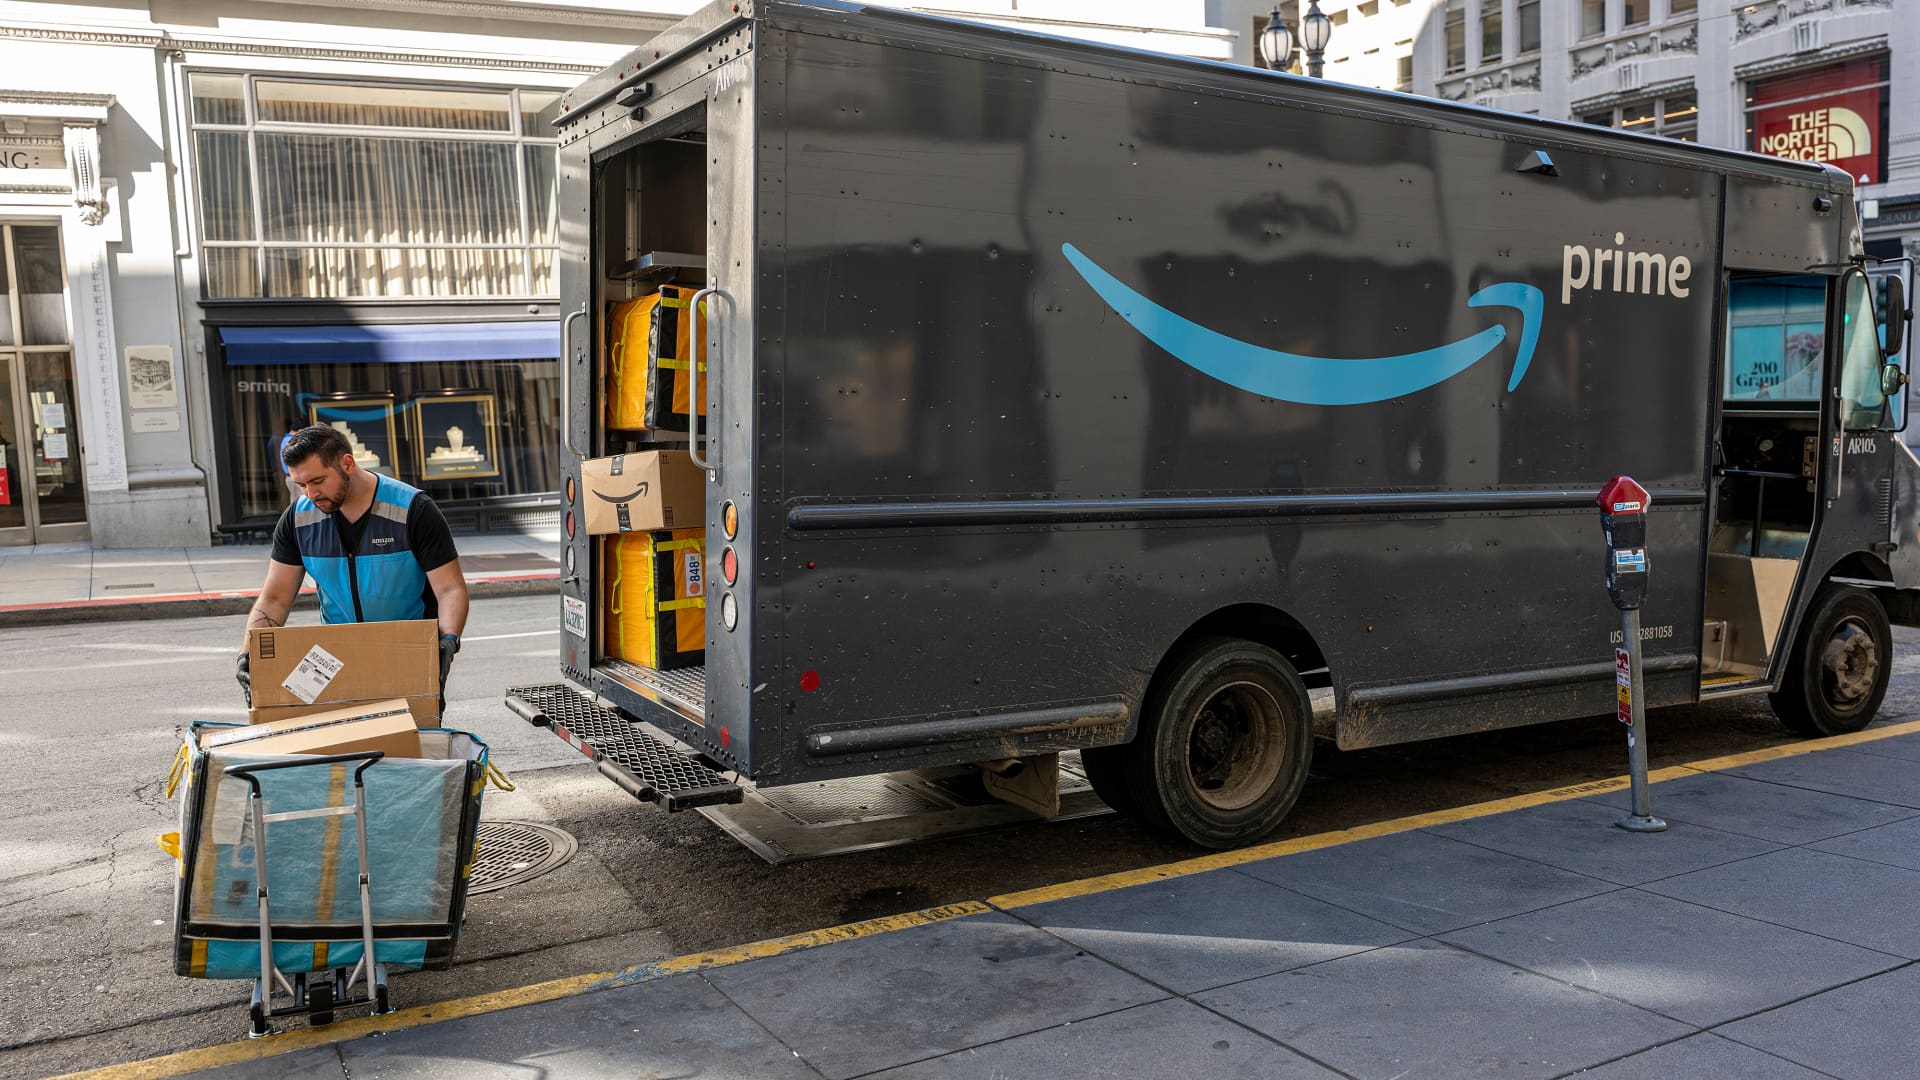 Amazon shoppers shrug off second Prime Day sale